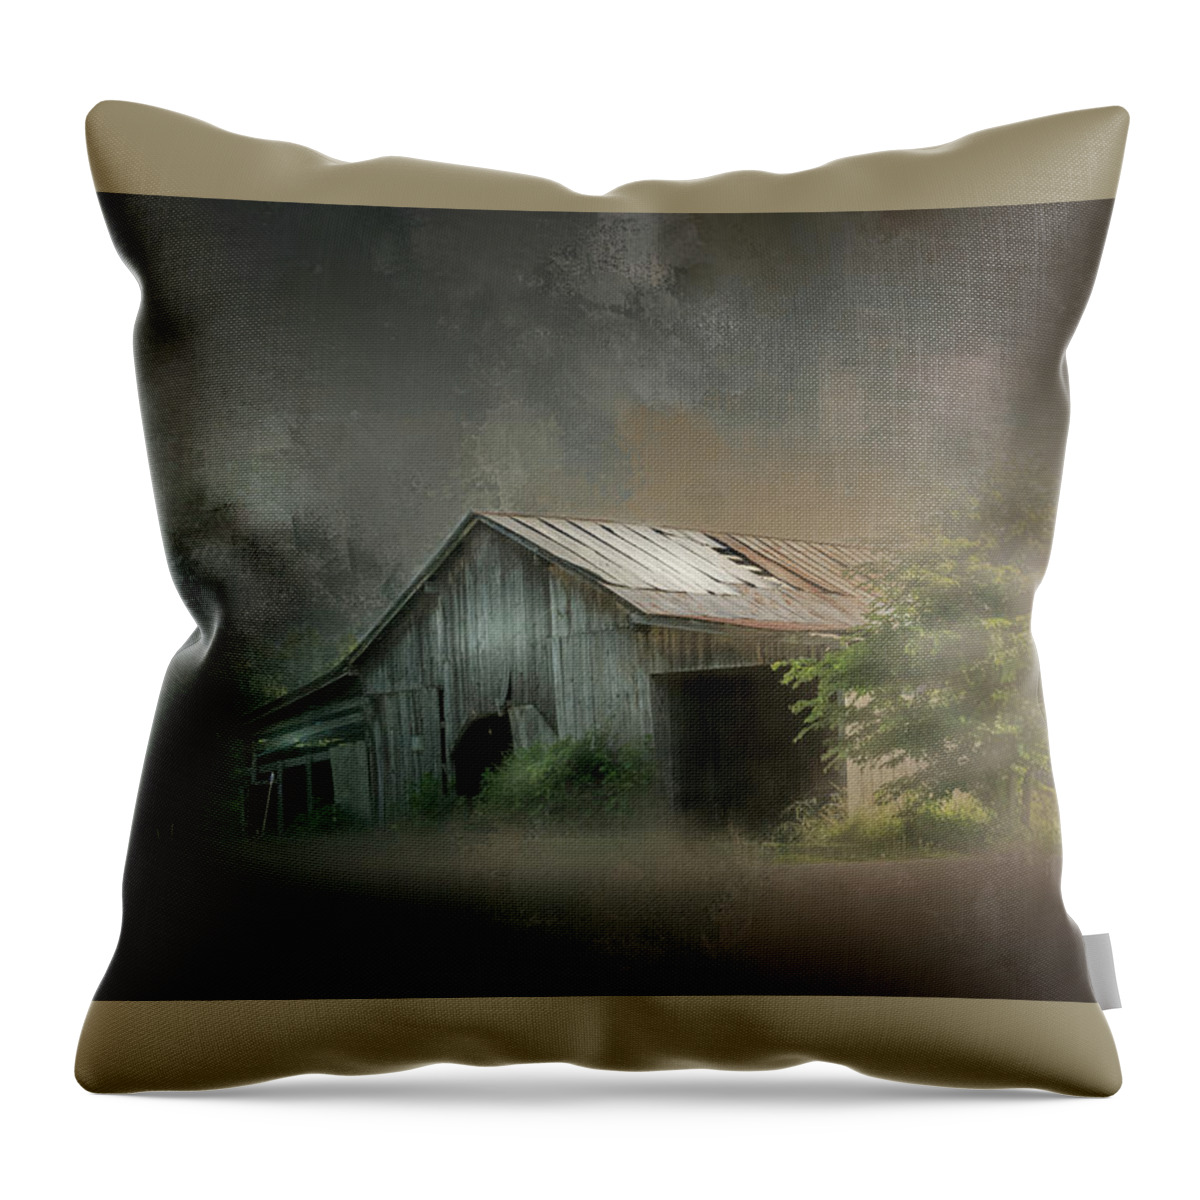 Barn Throw Pillow featuring the photograph Relic Of The Past by Marvin Spates